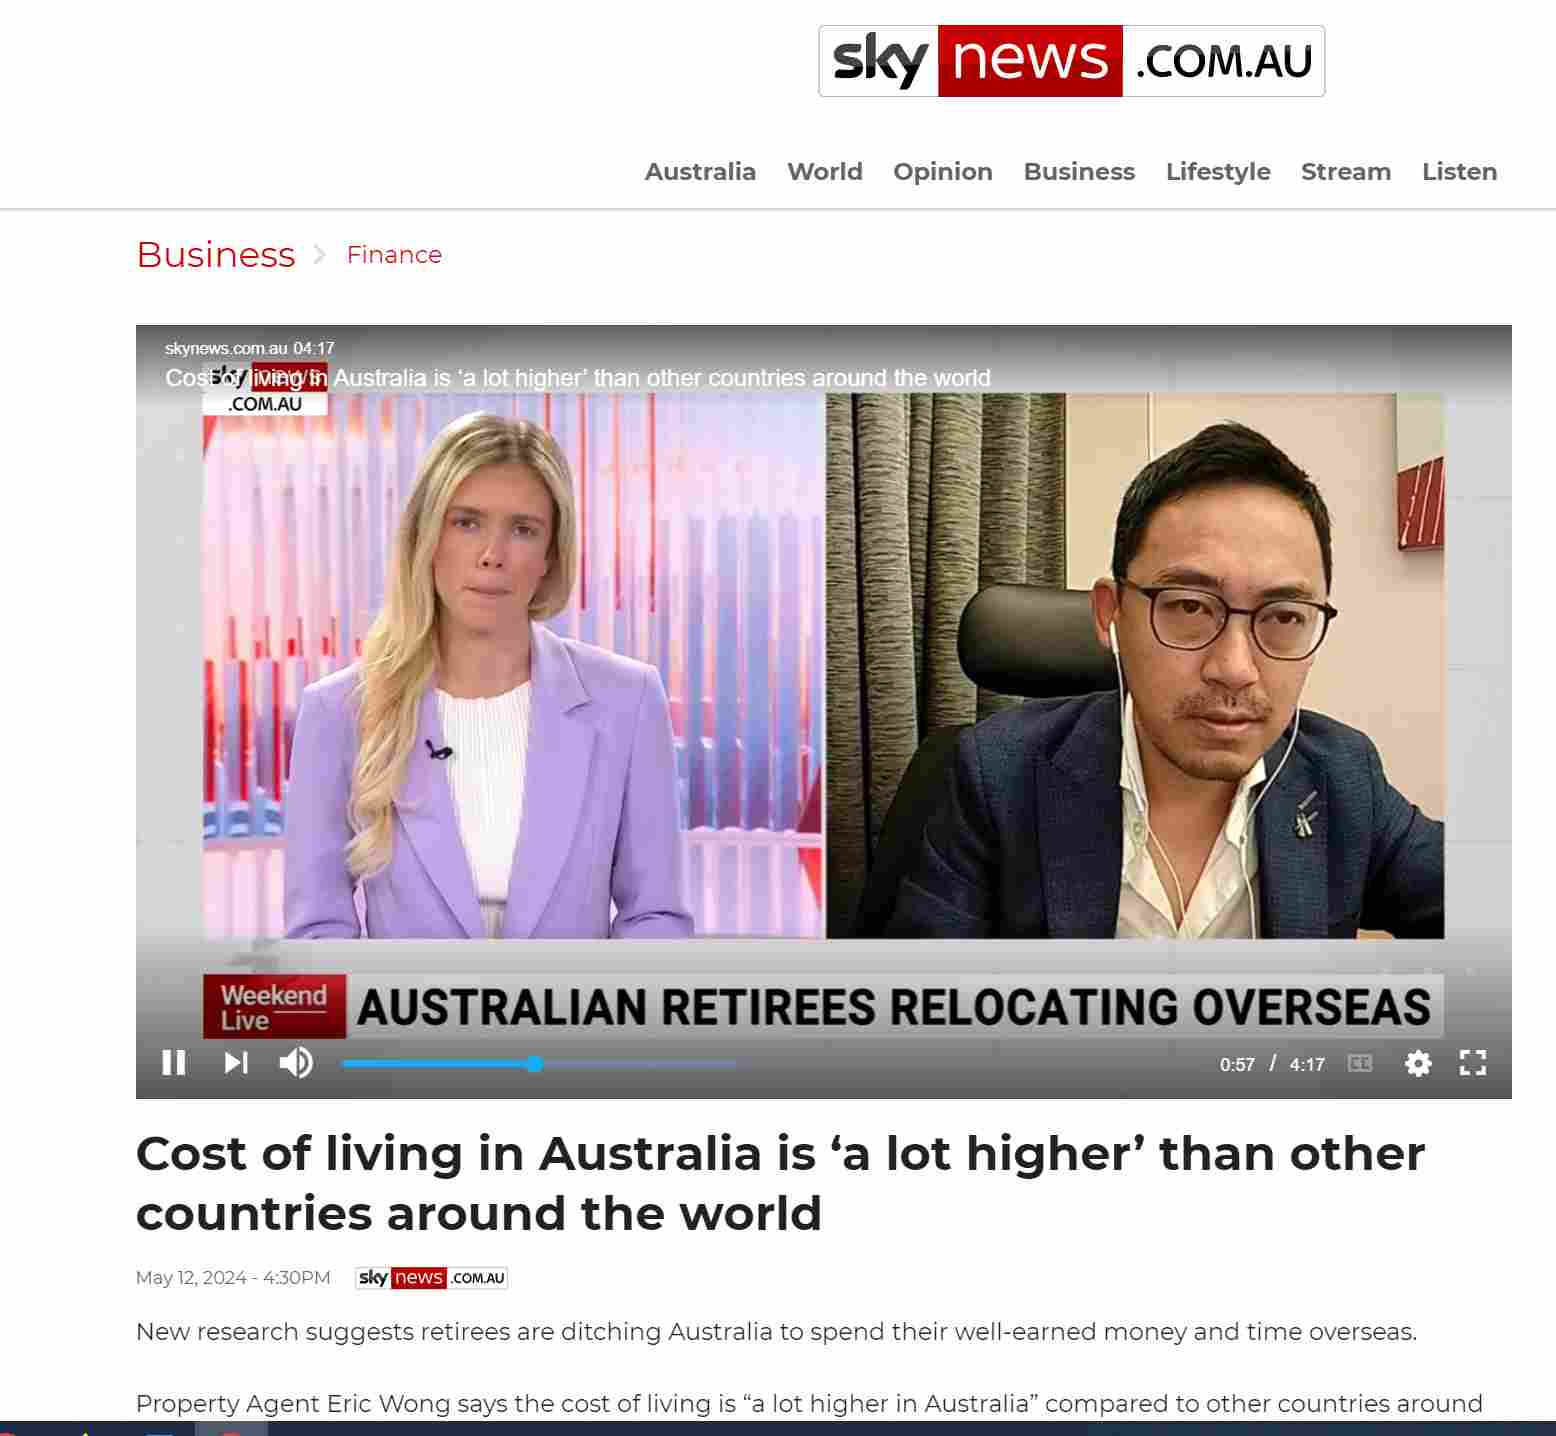 A Sky News AU broadcast shows a man and a woman discussing Australian retirees relocating overseas due to high living costs. The headline below reads: 